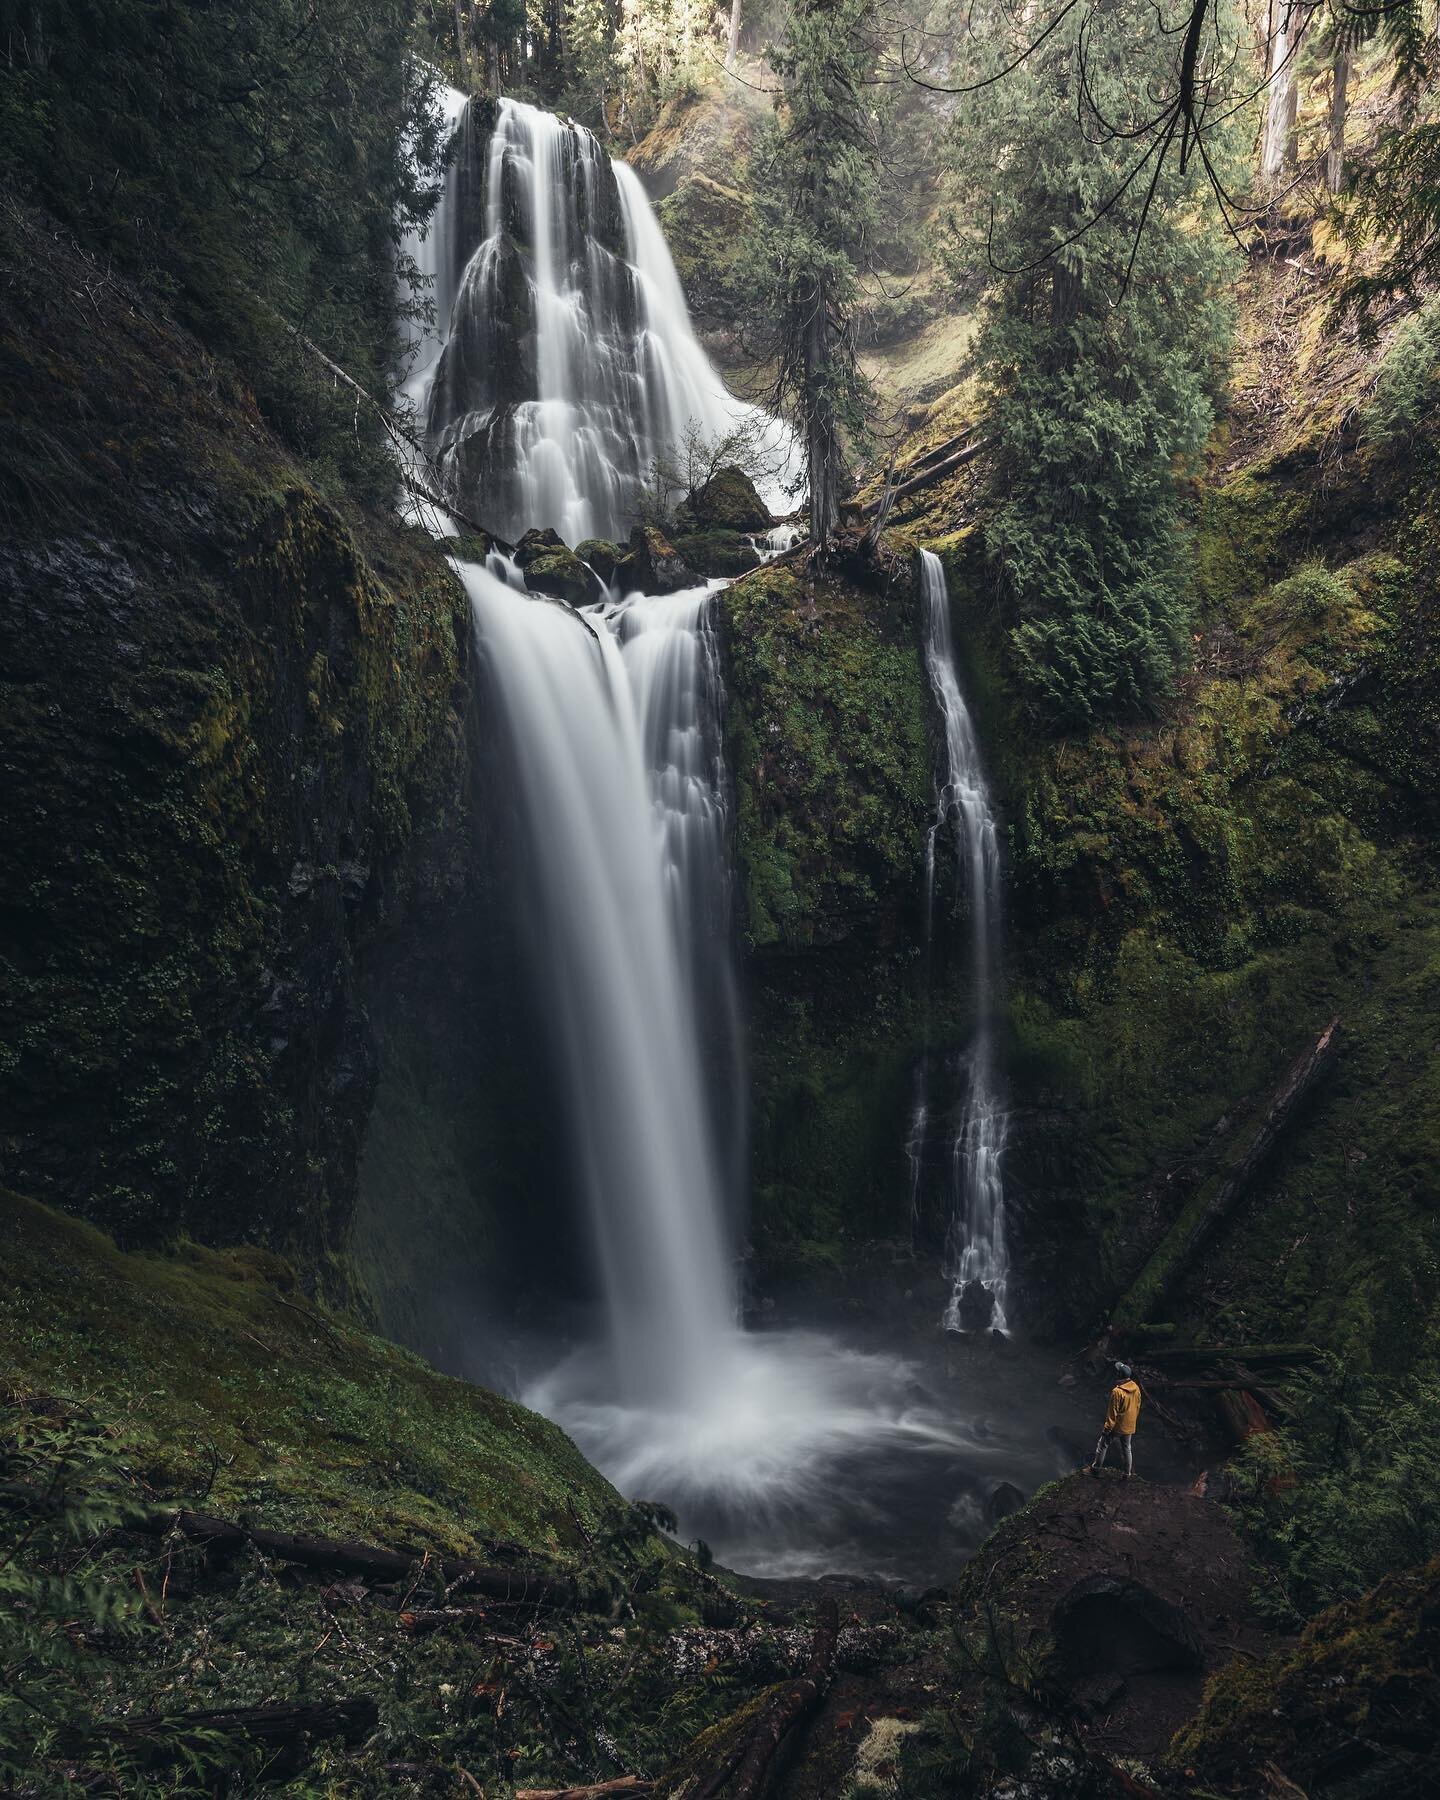 I almost forgot about waterfall wednesday. Here&rsquo;s a moody one from Gifford Pinchot National Forest.
.
.
.
.
#waterfall #pnw #washington #earthoutdoors #pacificnorthwest #wildernessculture 
#stayandwander #heatercentral #pnw_shooters #streetfram